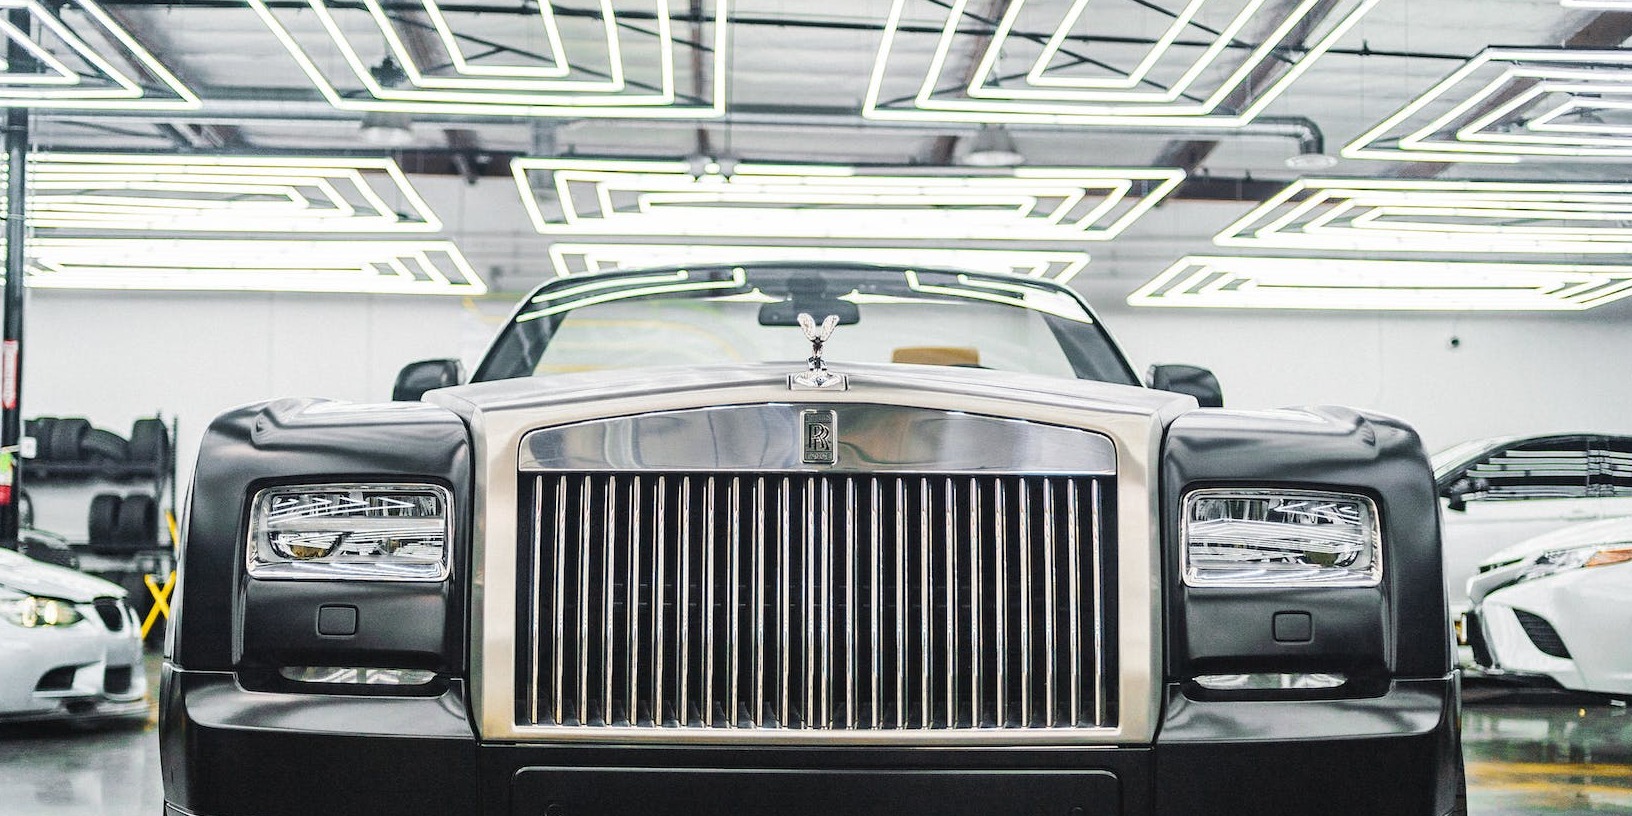 What Makes the Rolls Royce Ghost the Ultimate Wedding Car Choice in Gloucester?